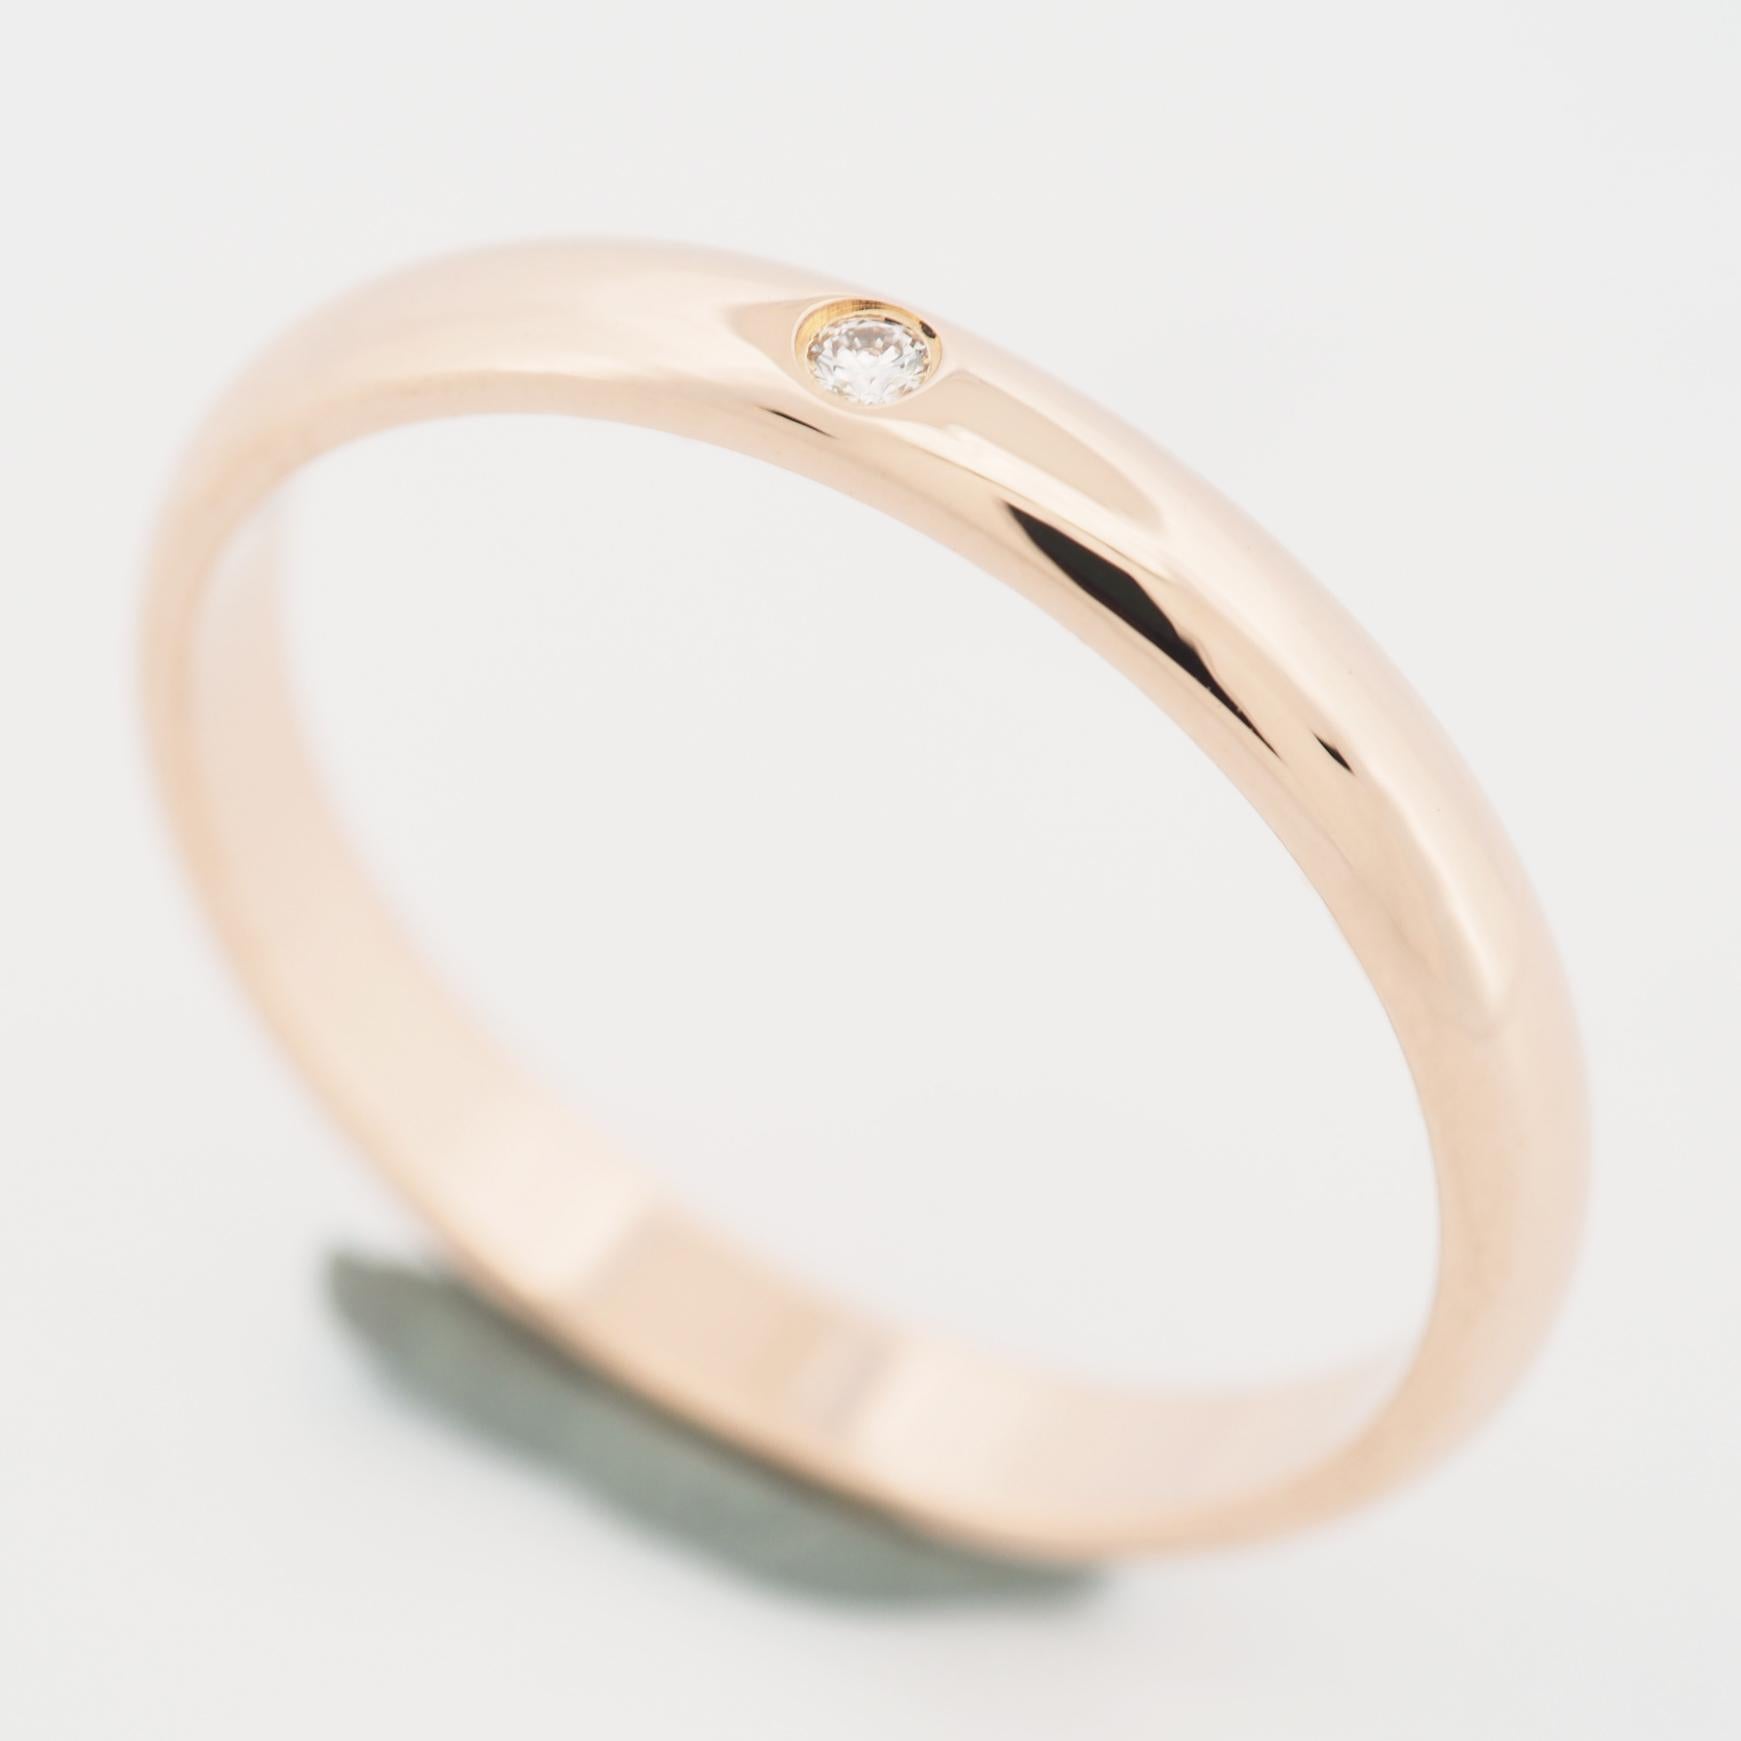 Item: Cartier 1895 Wedding Band Diamond Ring
Stones: Diamond (0.01ct)
Metal: 18K Rose Gold
Ring Size: 52 US SIZE 6.0 UK SIZE L 1/4
Internal Diameter: 16.50 mm
Measurement: 2.6 mm
Weight: 2.4 Grams
Condition: Used (repolished)
Retail Price: USD930